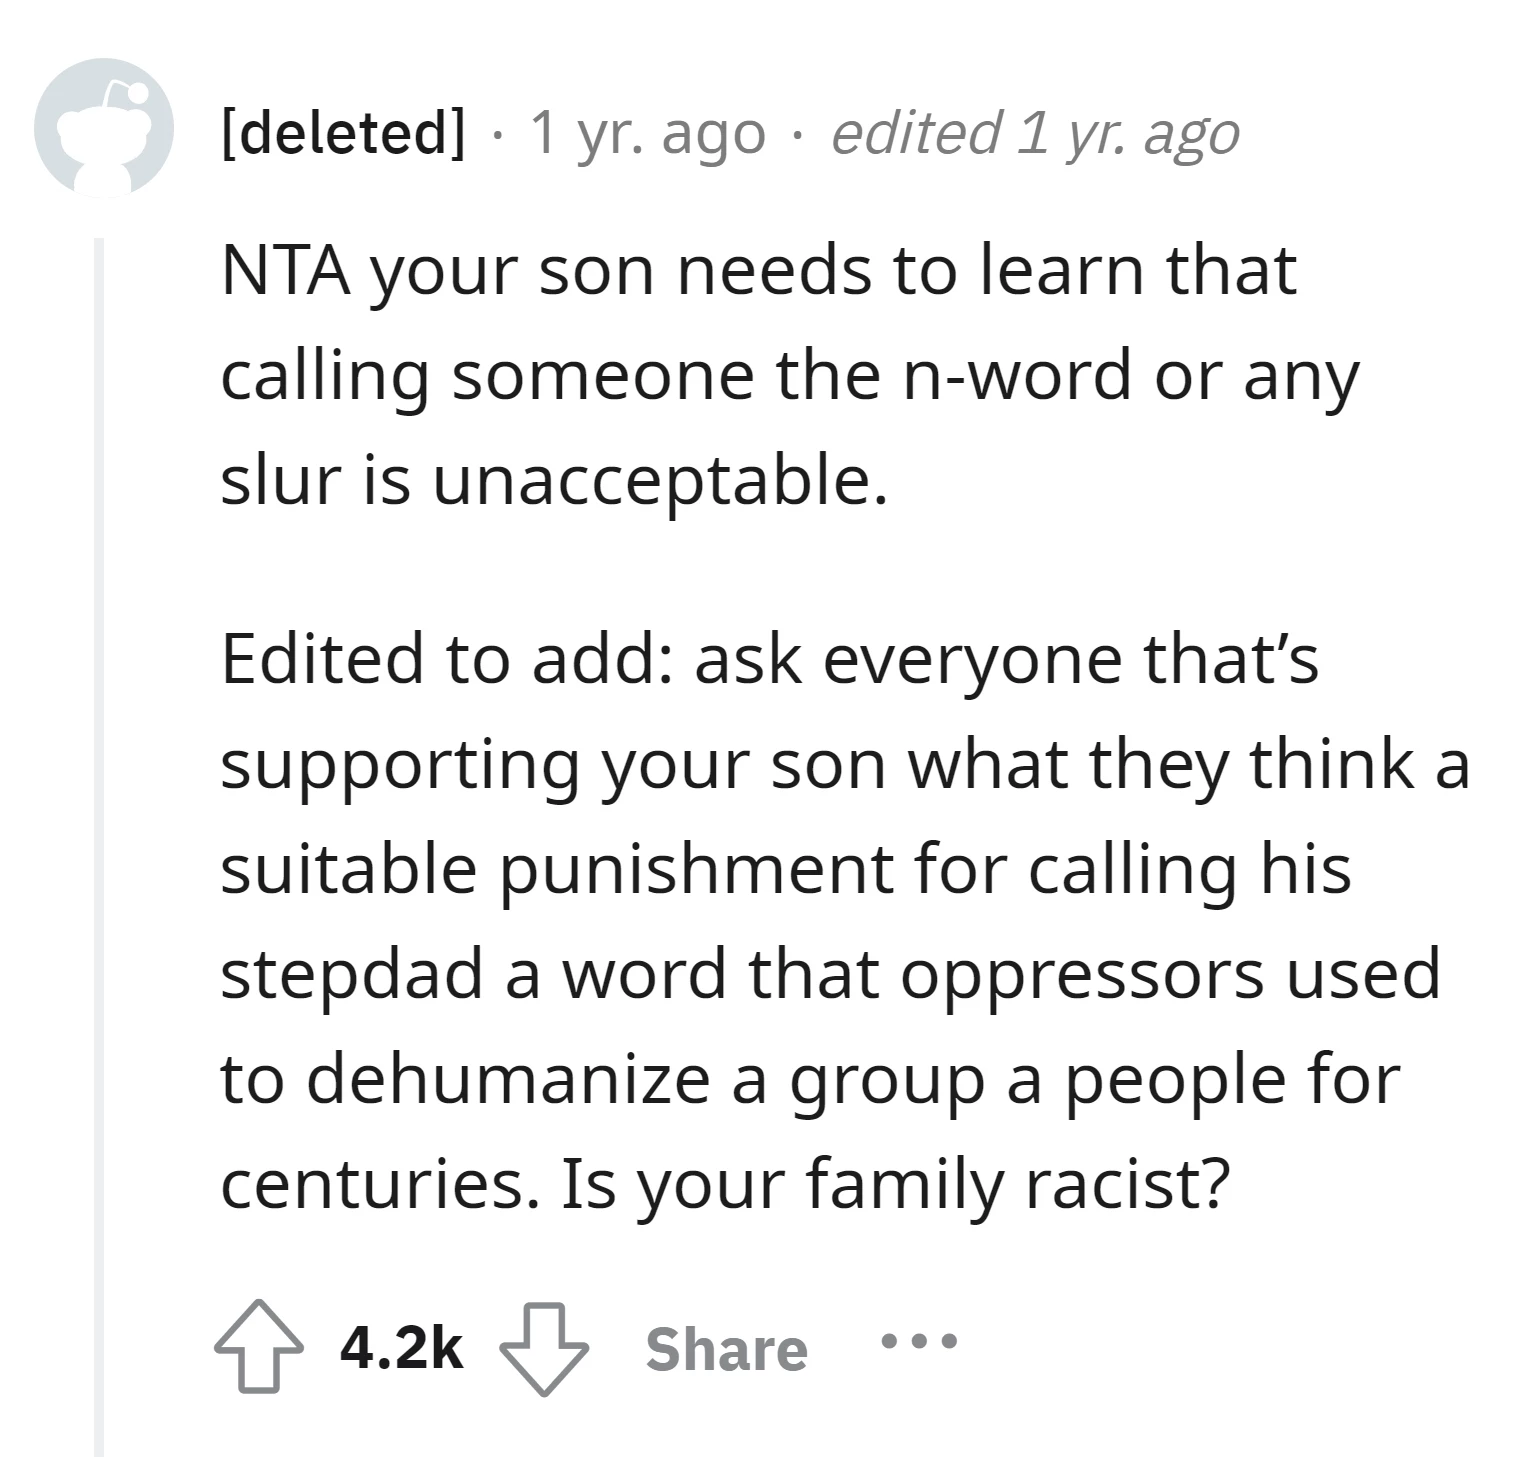 It's necessary for the son to understand the unacceptability of using racial slurs